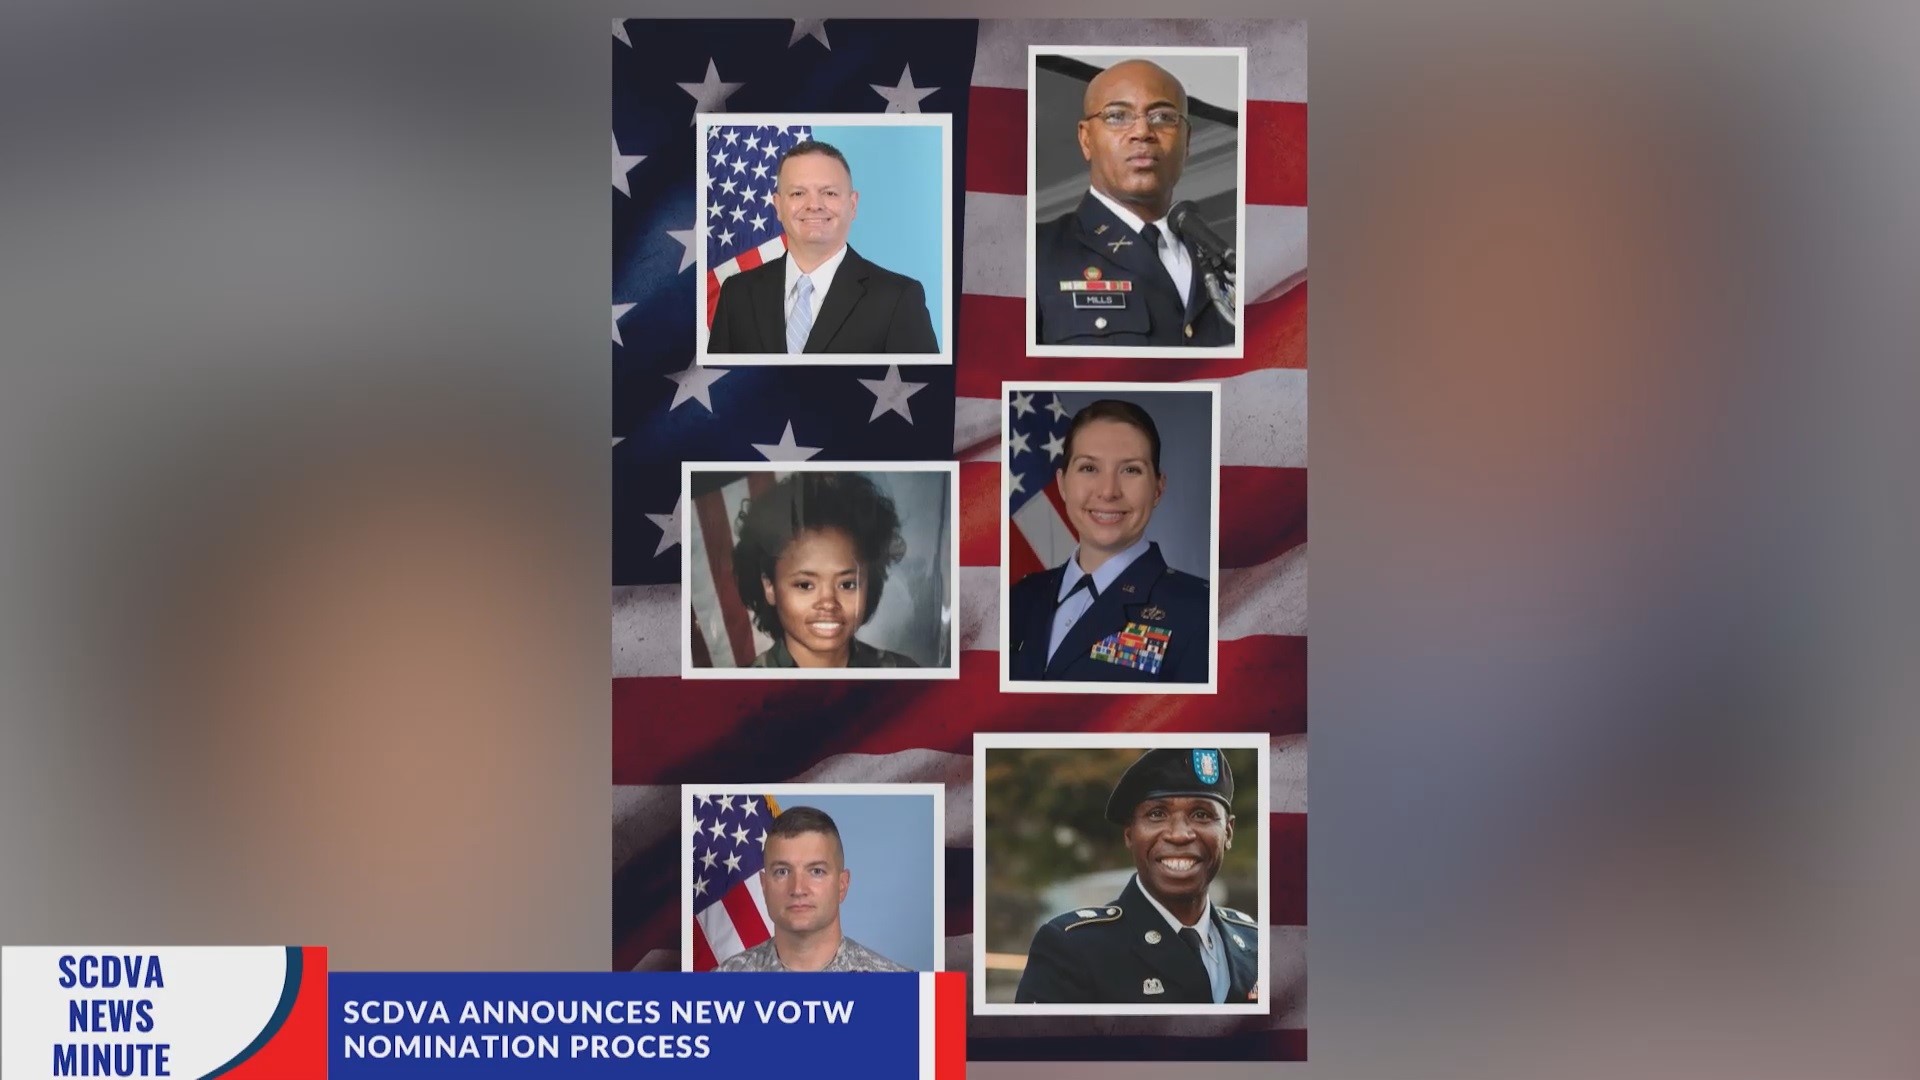 The SCDVA is making significant changes to the way they honor veterans.